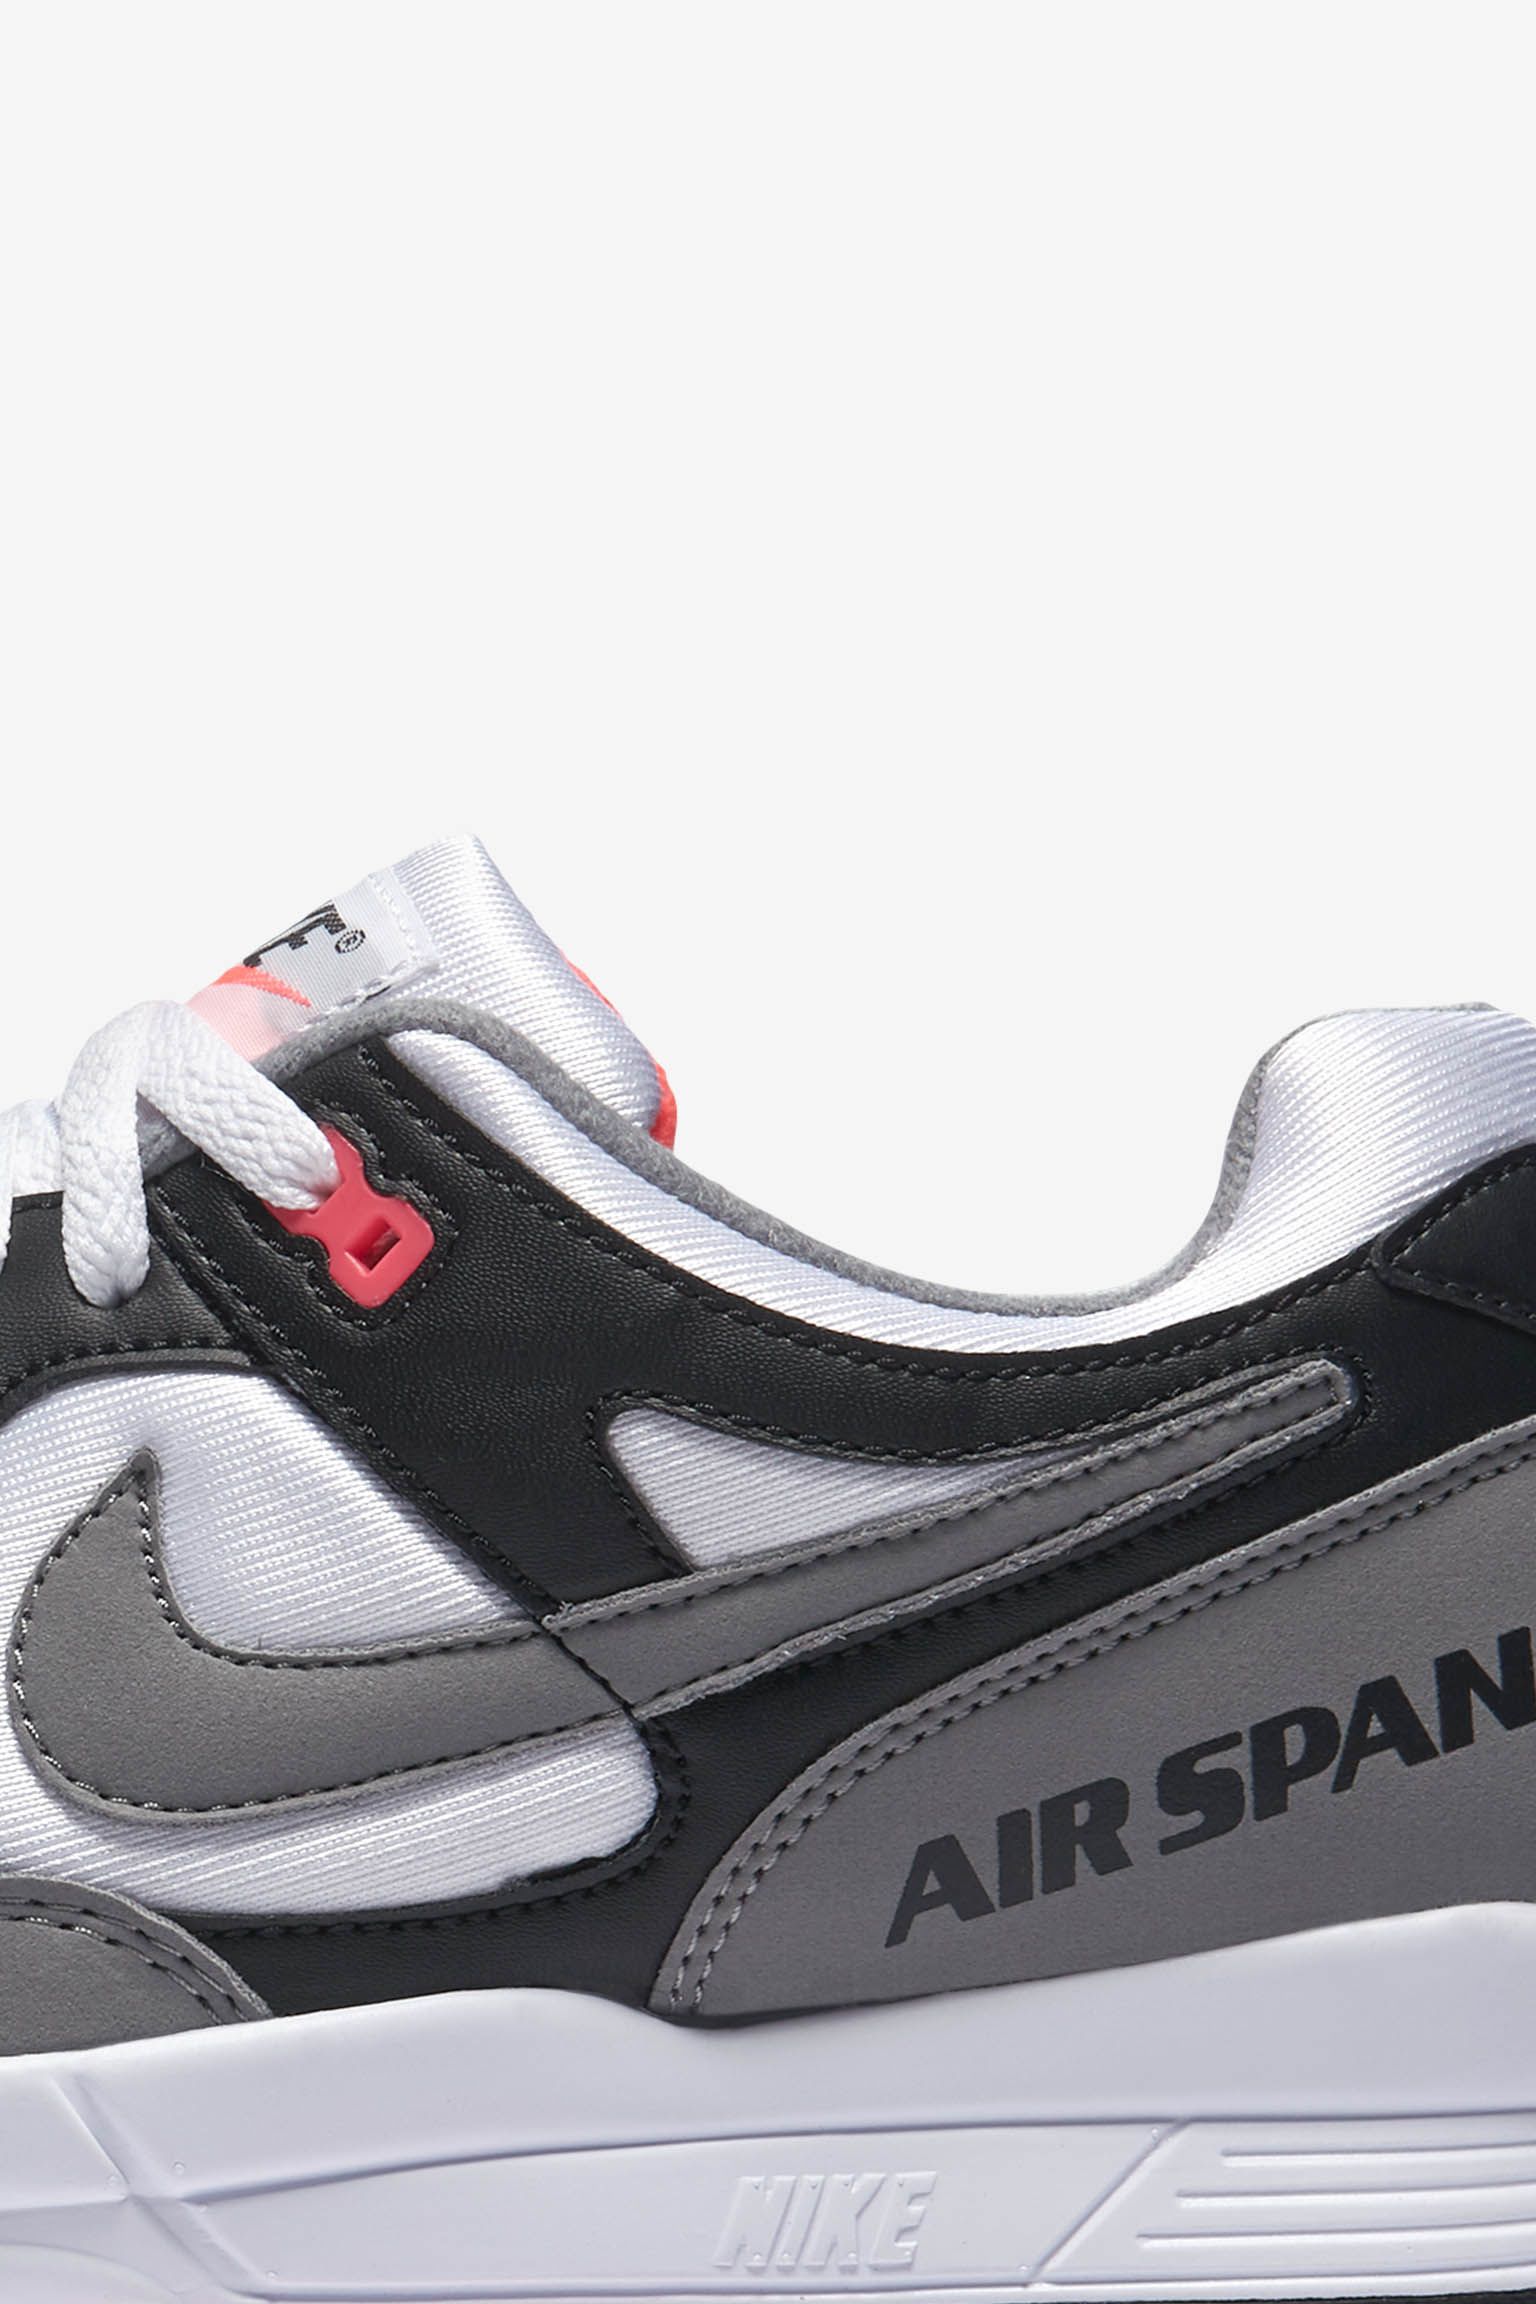 Nike Air Span 2 &amp; Release Date. Nike SNKRS SE